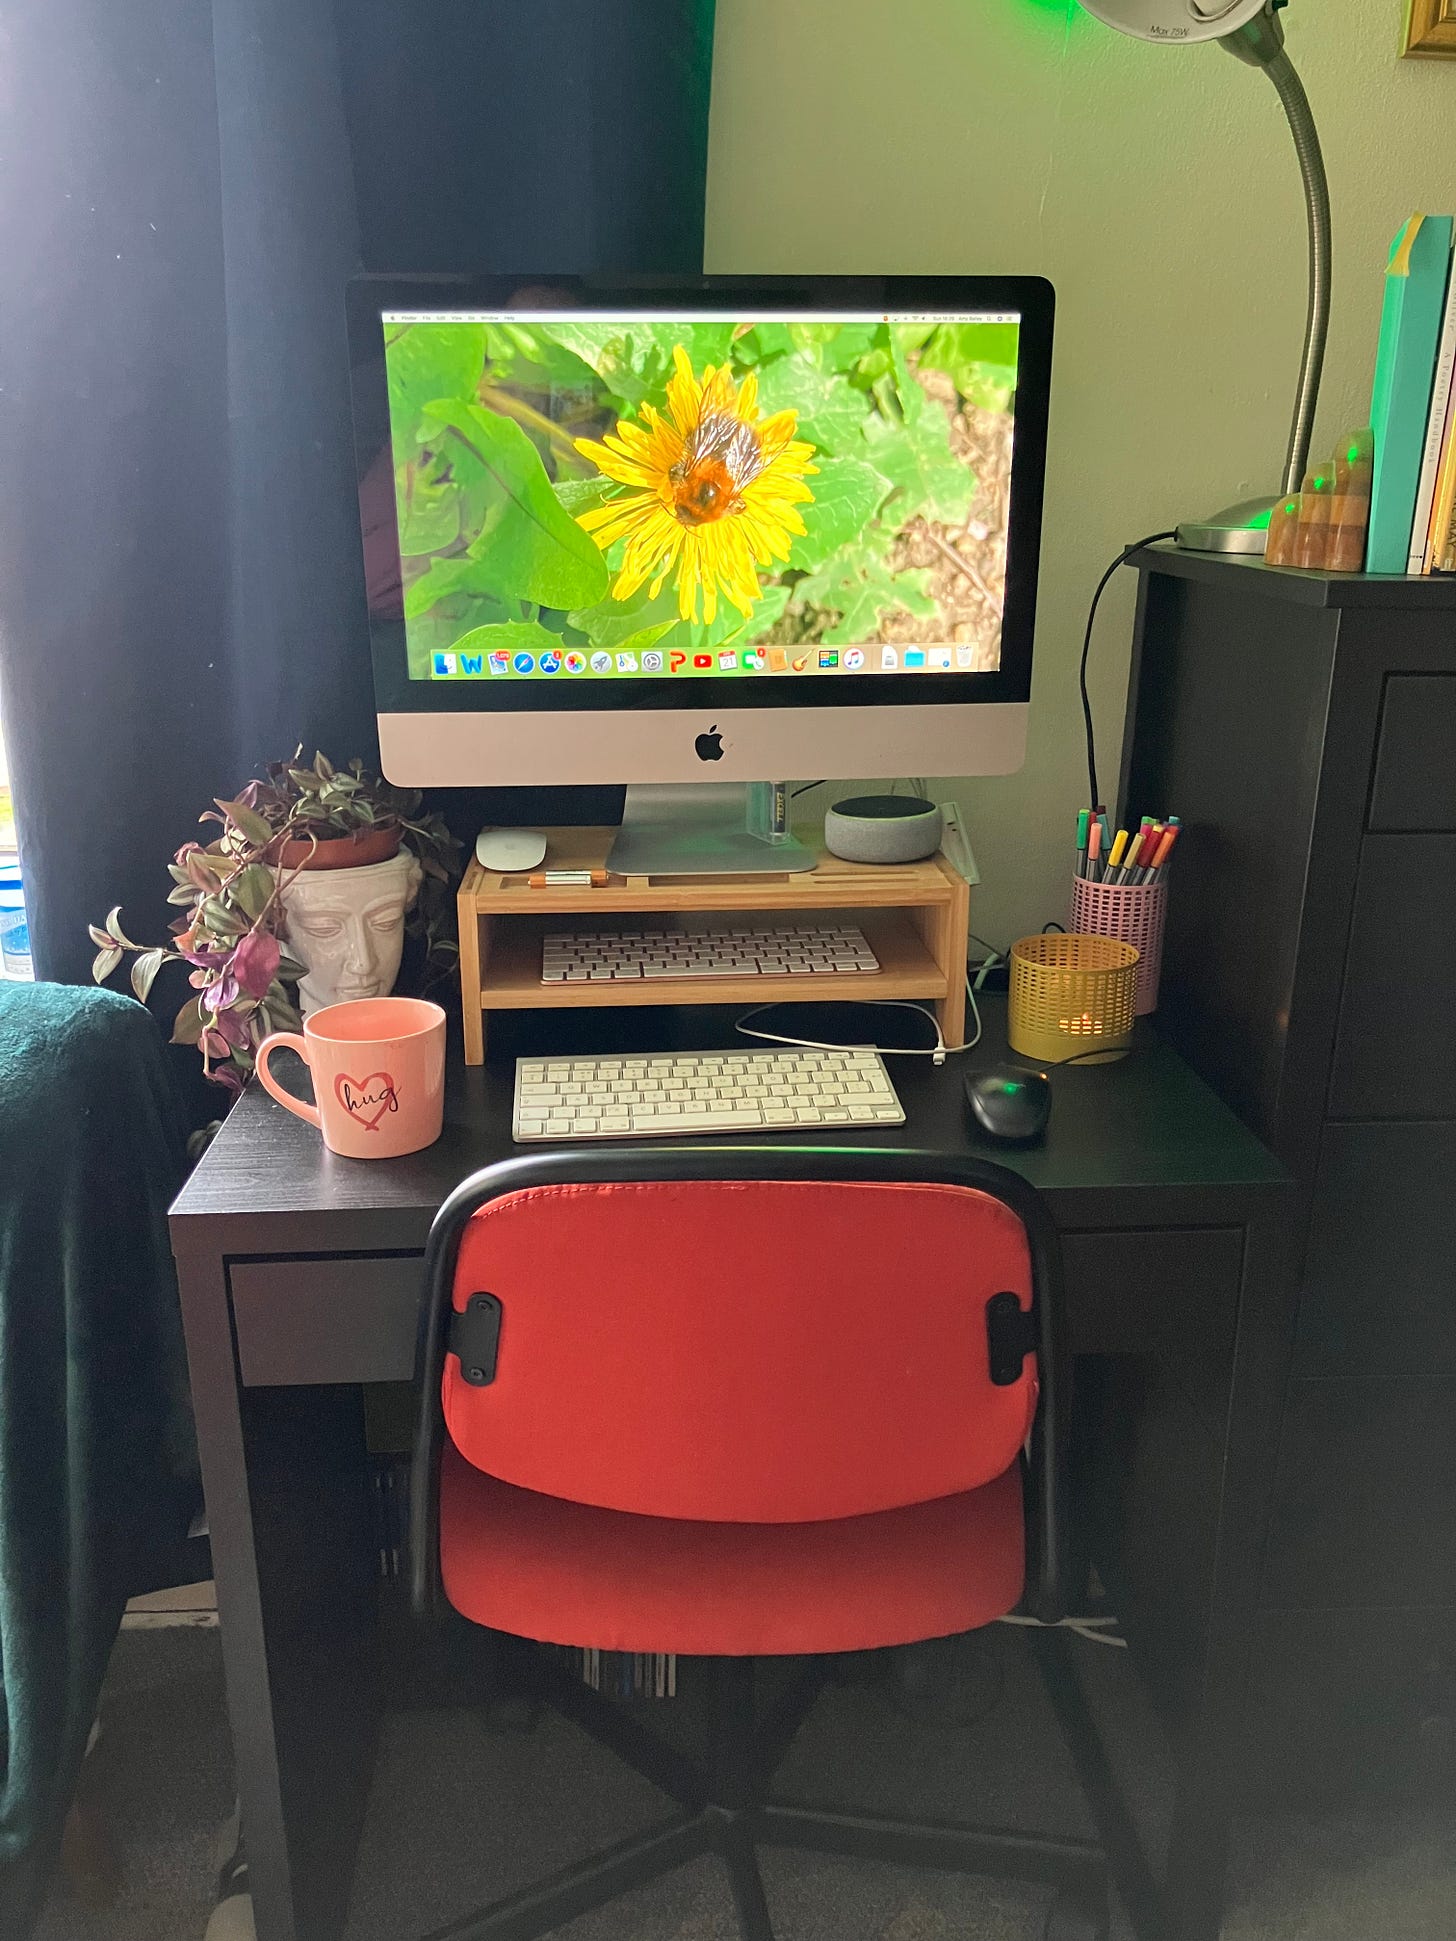 A very old iMac on a black desk, surrounded by a plant in a pot shaped like a face, a pink mug, a yellow tealight holder and a pink pen holder containing pens.  The desk chair is red.